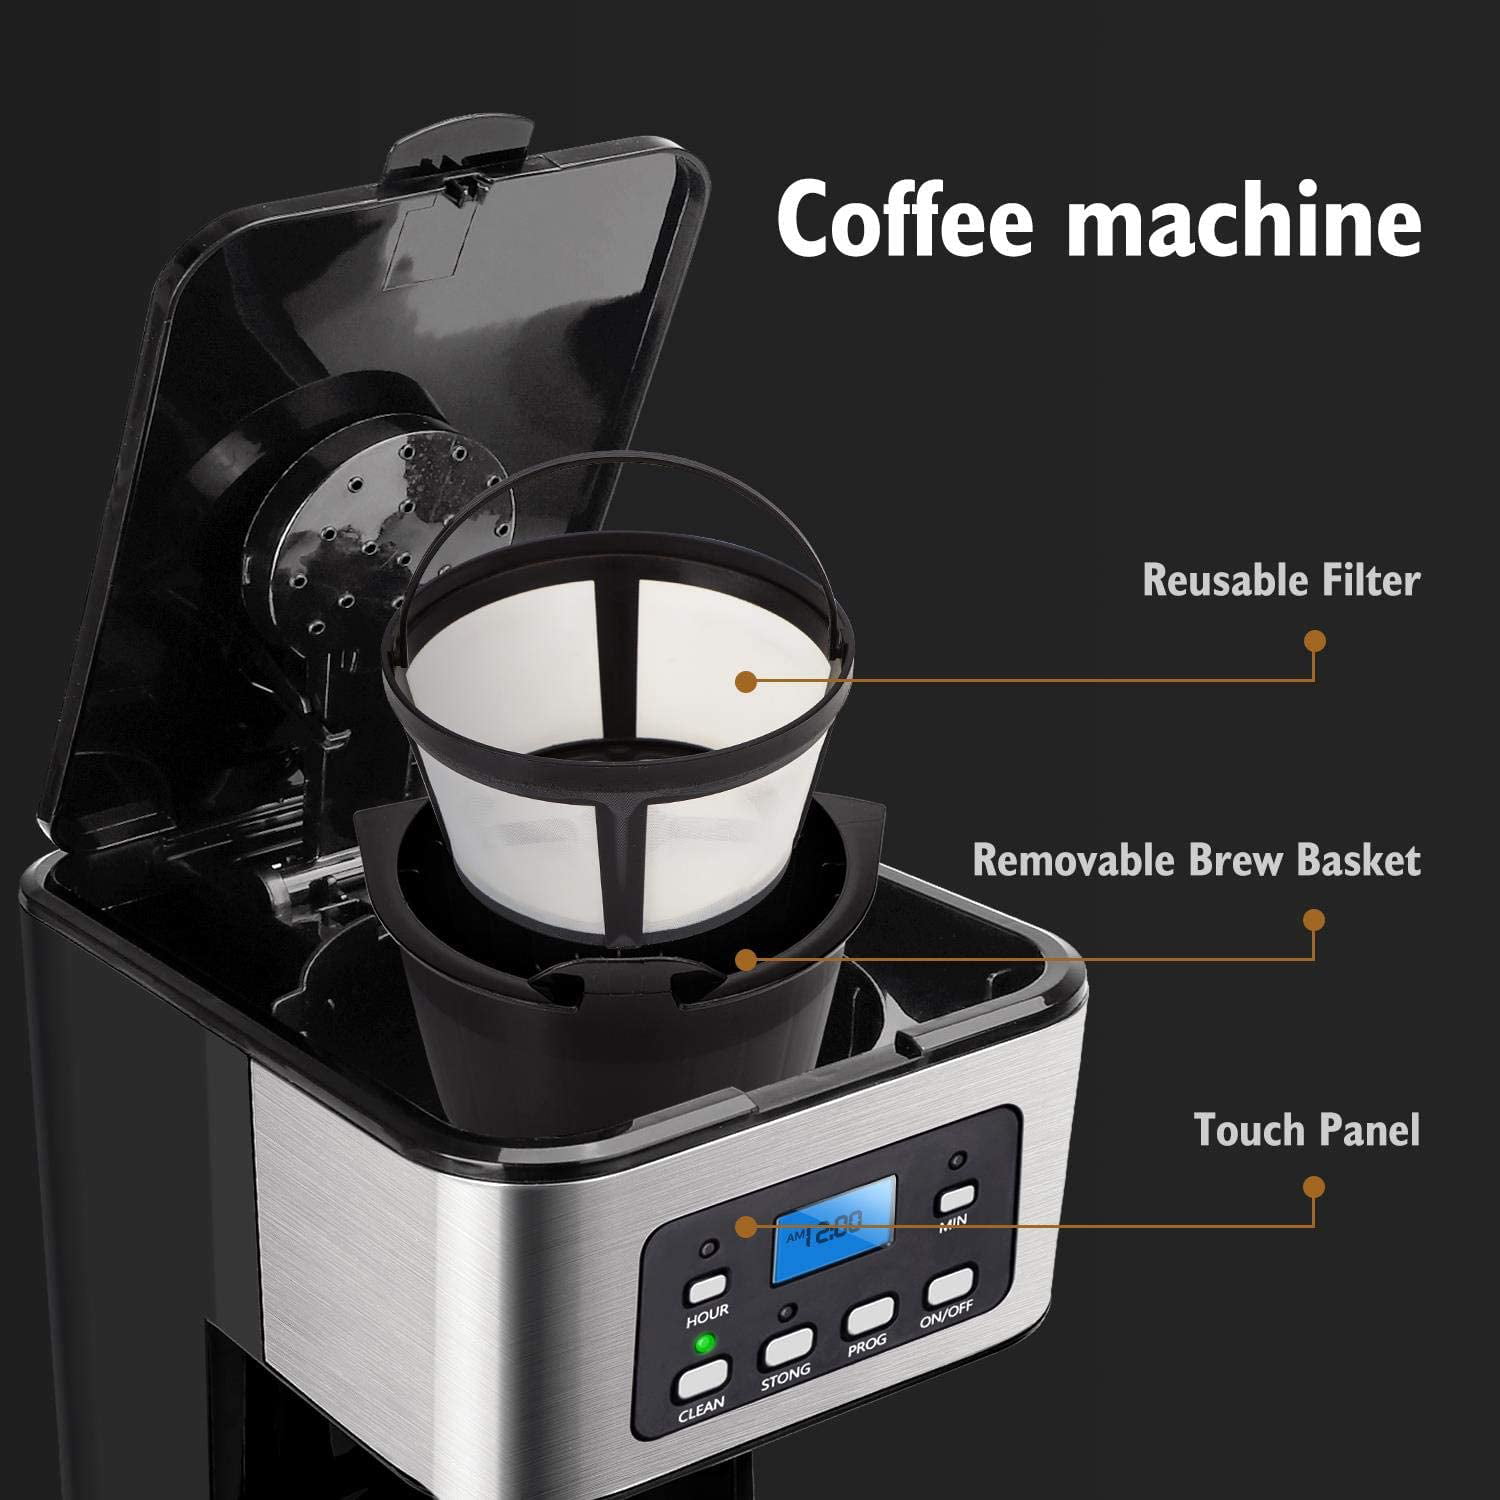 Safeplus 12 Cup Programmable Coffee Maker,LCD Display Drip Coffee Brewer,  Coffee Machine with 1.8 litres Glass Carafe Capacity, Water Tank other  Drinks Tea, kitchen, Office, Reception Room, Party 